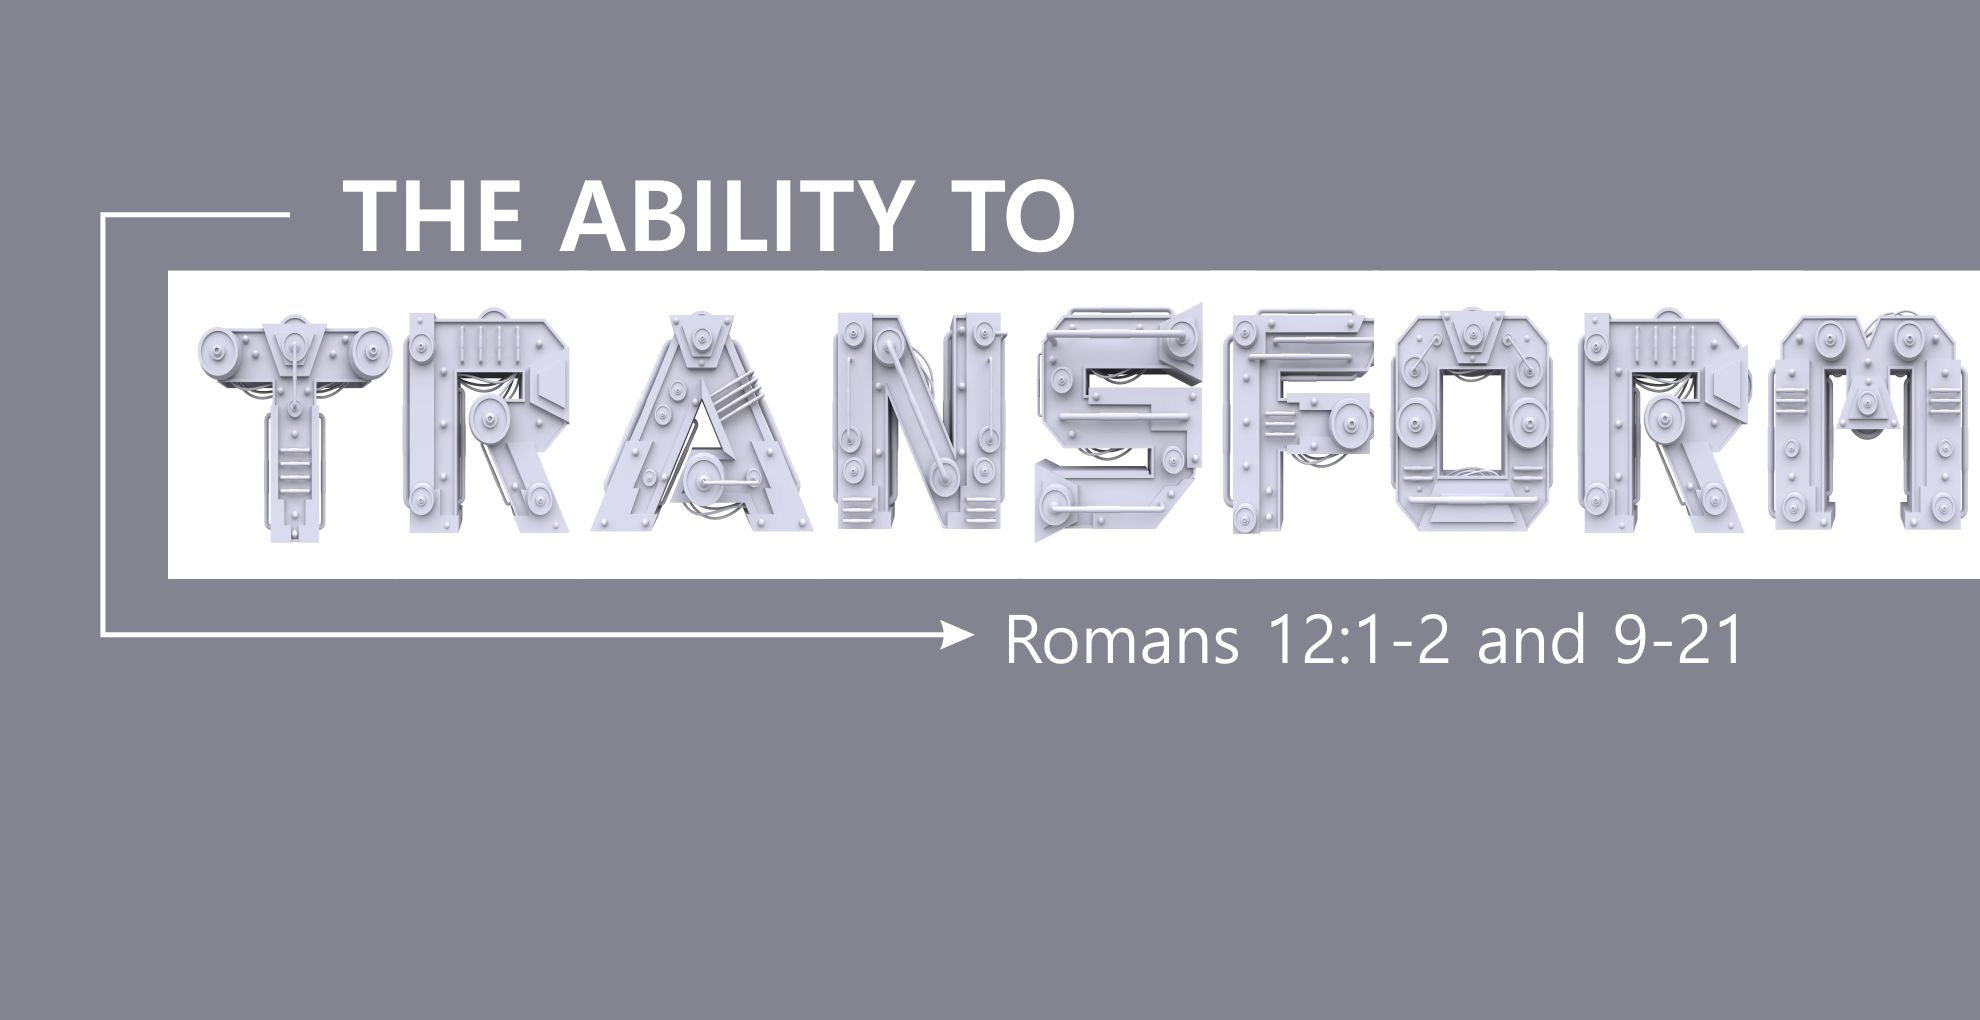 The Ability to Transform